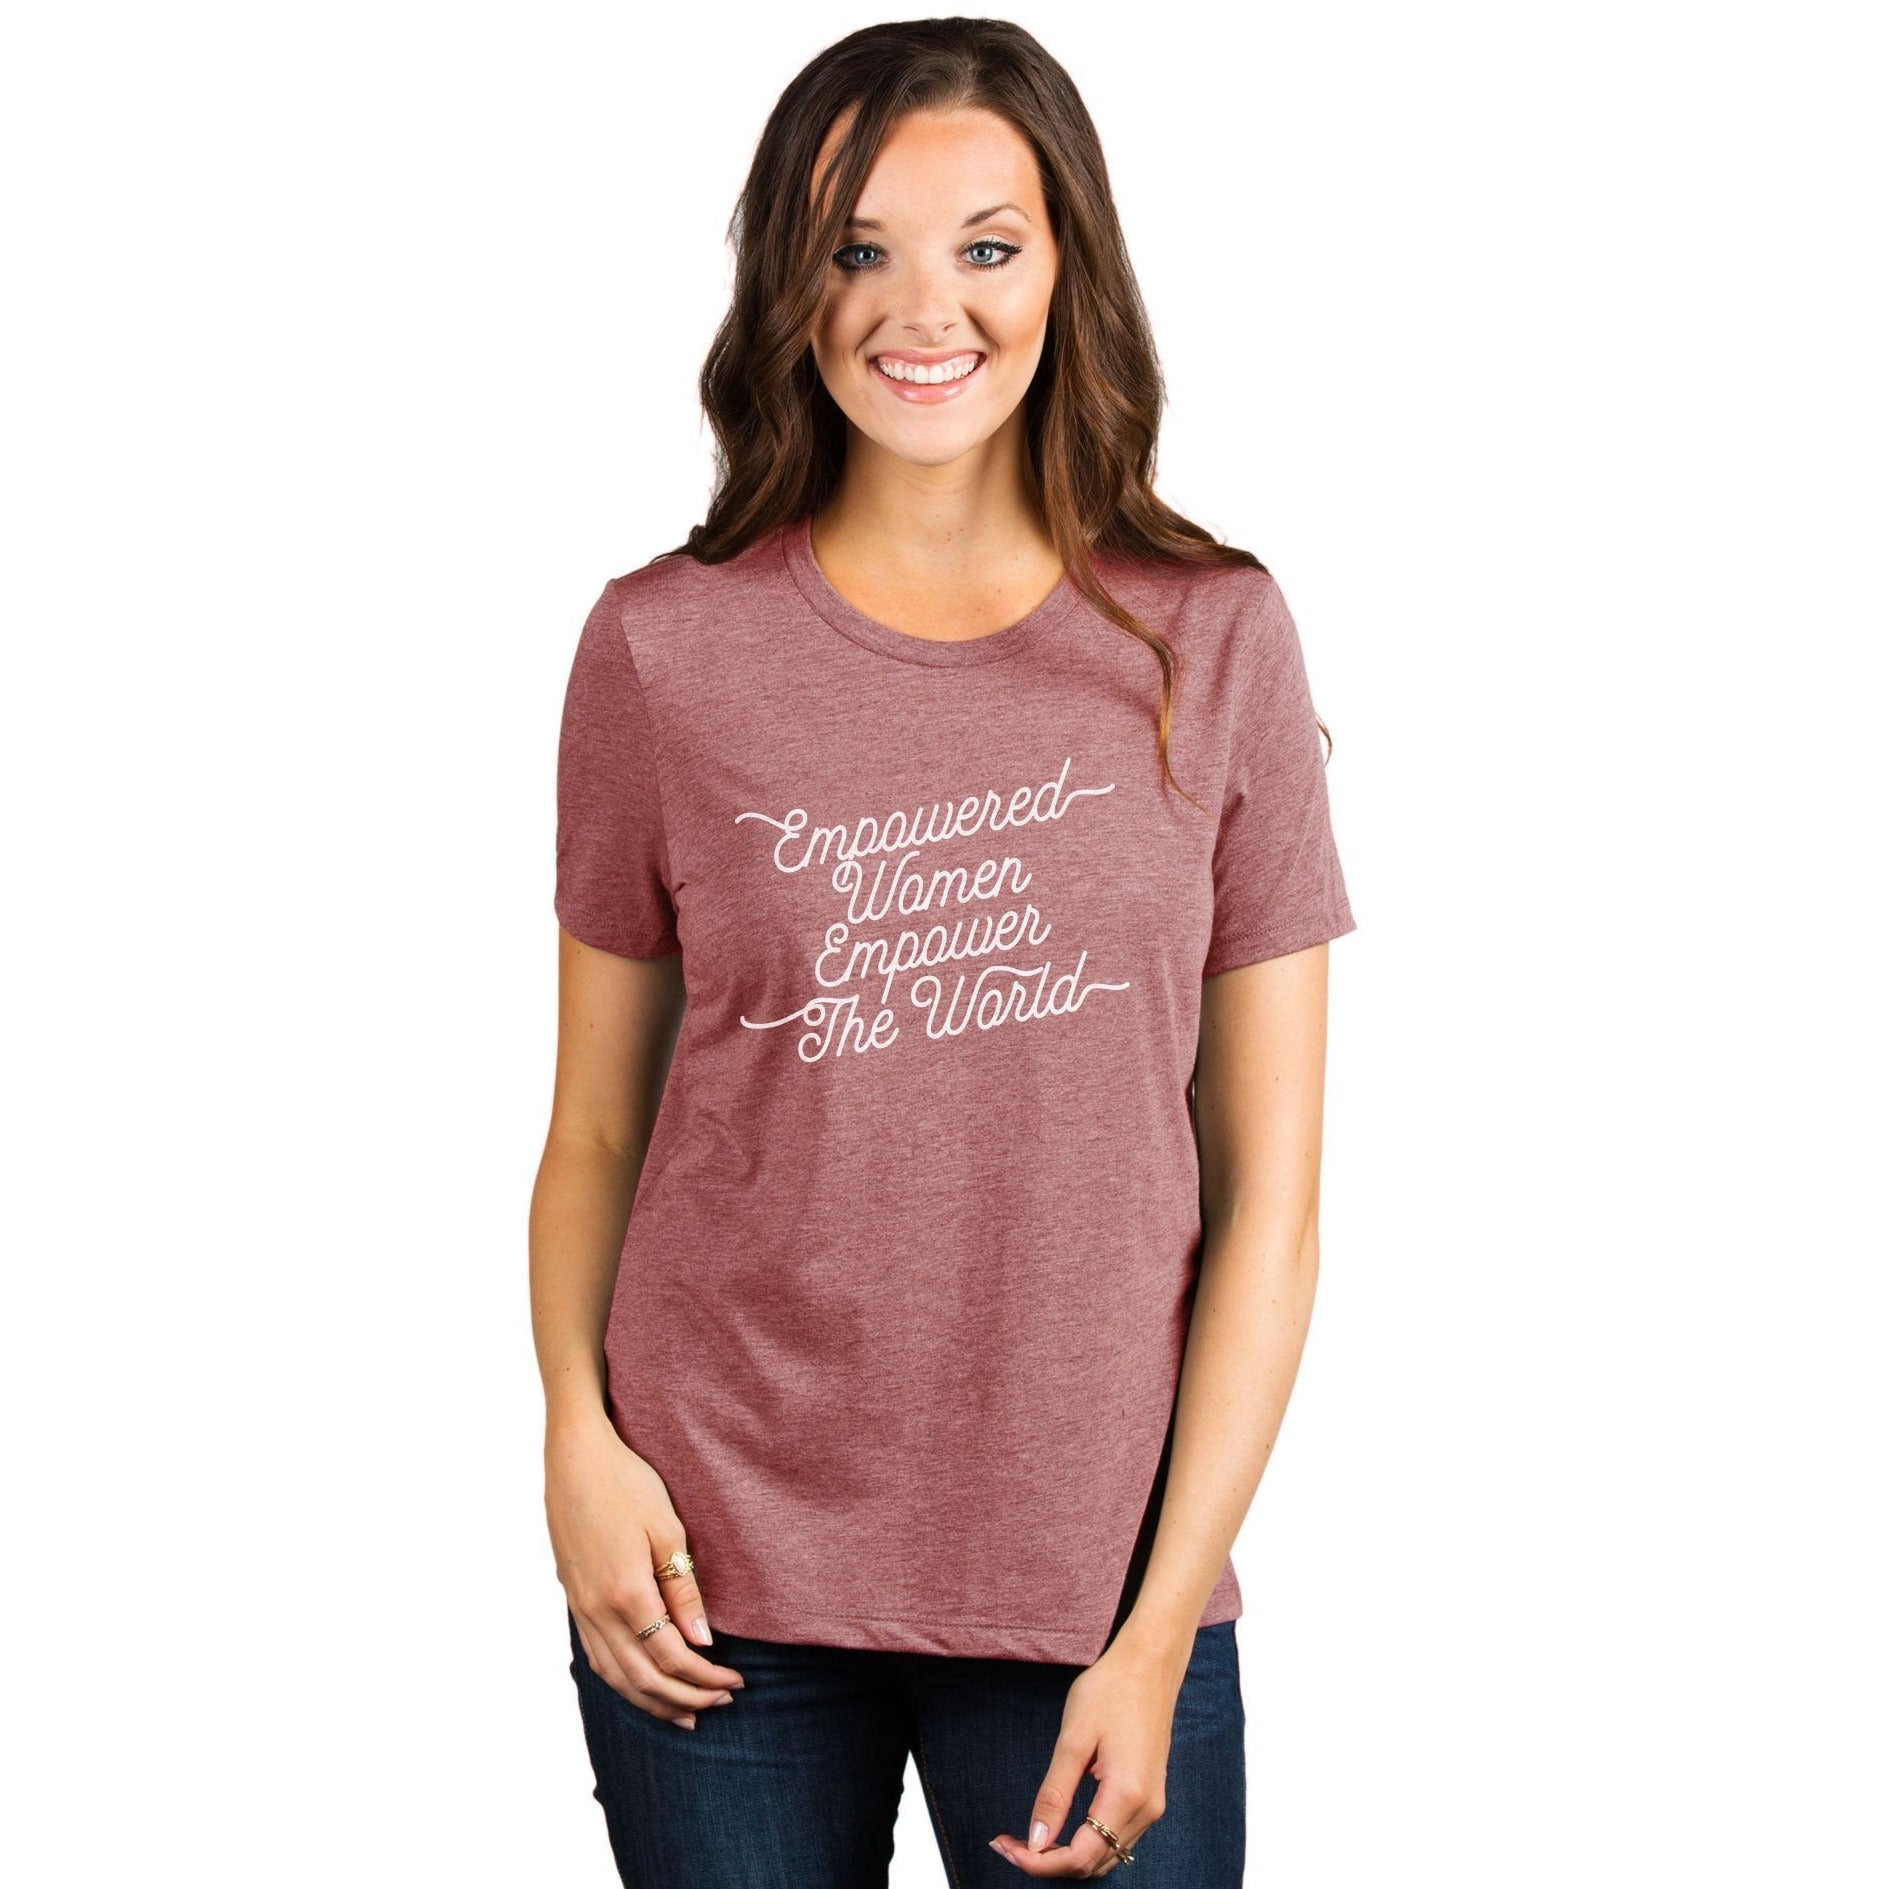 Empowered Women Empower The World Women's Relaxed Crewneck T-Shirt Top Tee Heather Rouge Model
